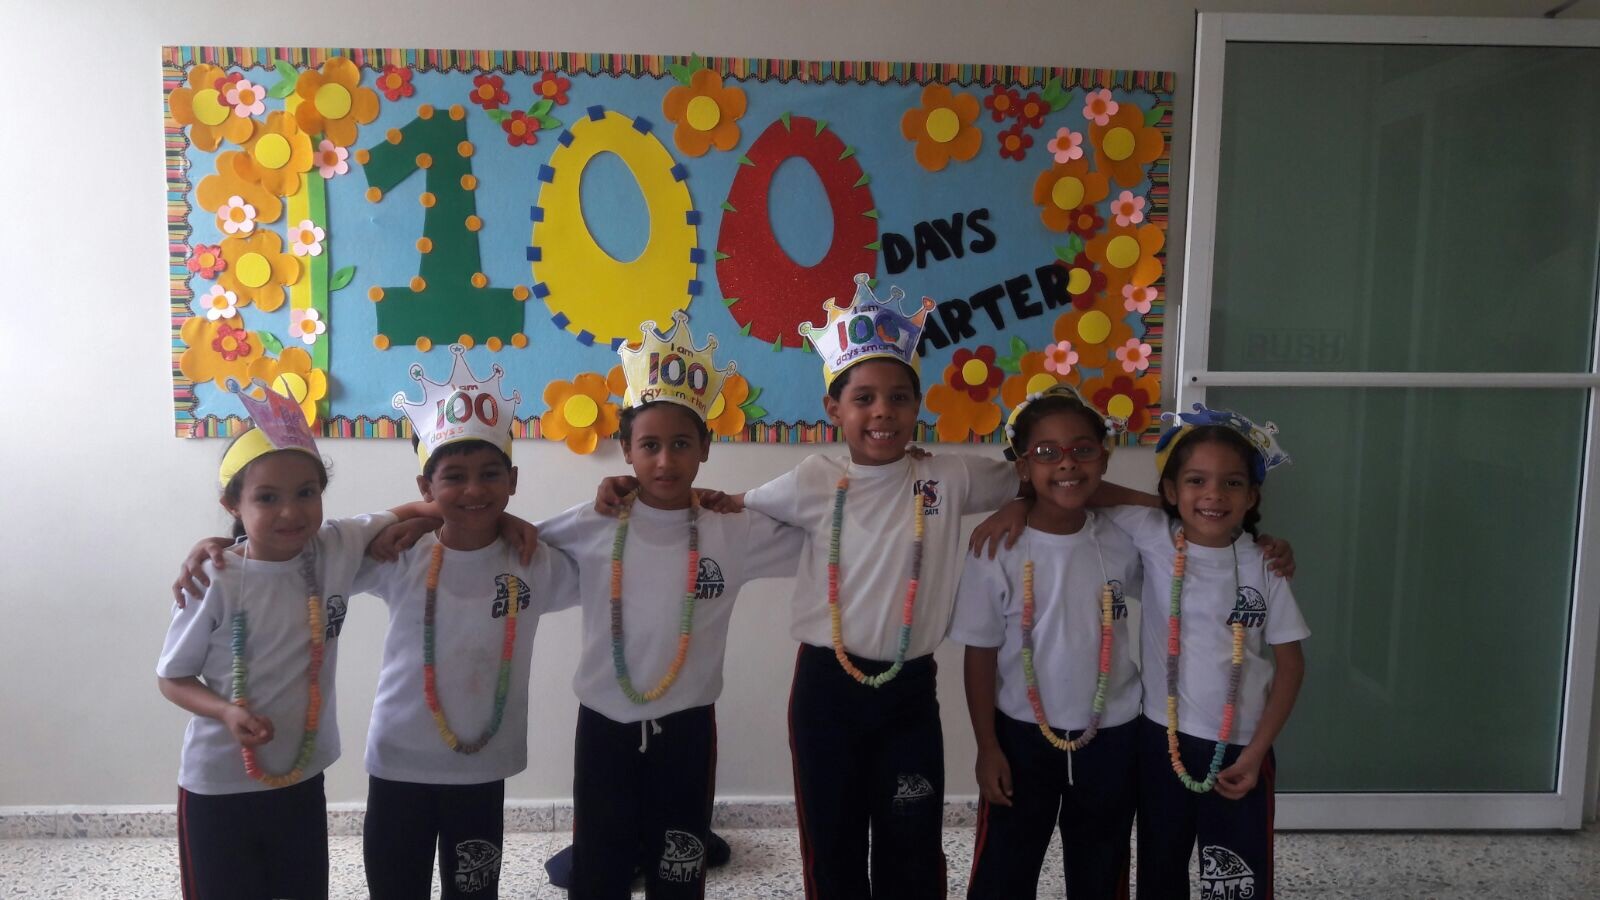 Cathedral International School celebrated the first 100 Days of school year.